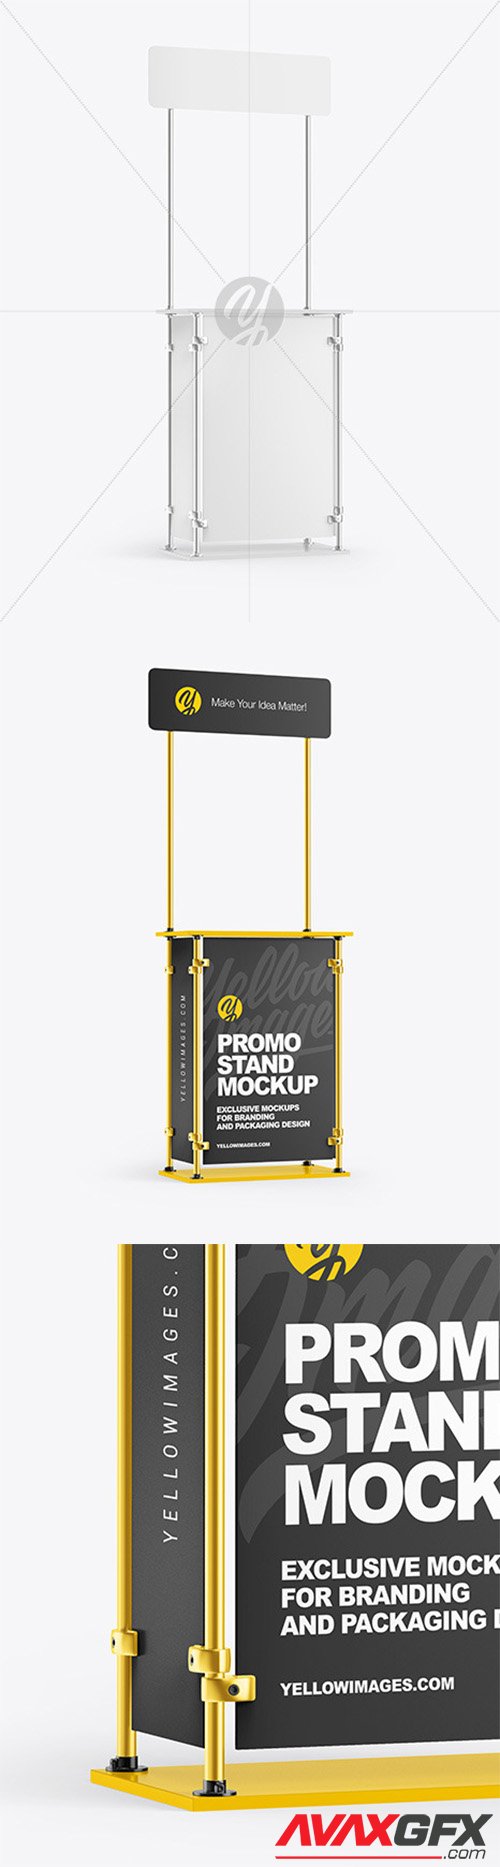 Download Metallic Promo Stand Mockup 63616 Avaxgfx All Downloads That You Need In One Place Graphic From Nitroflare Rapidgator